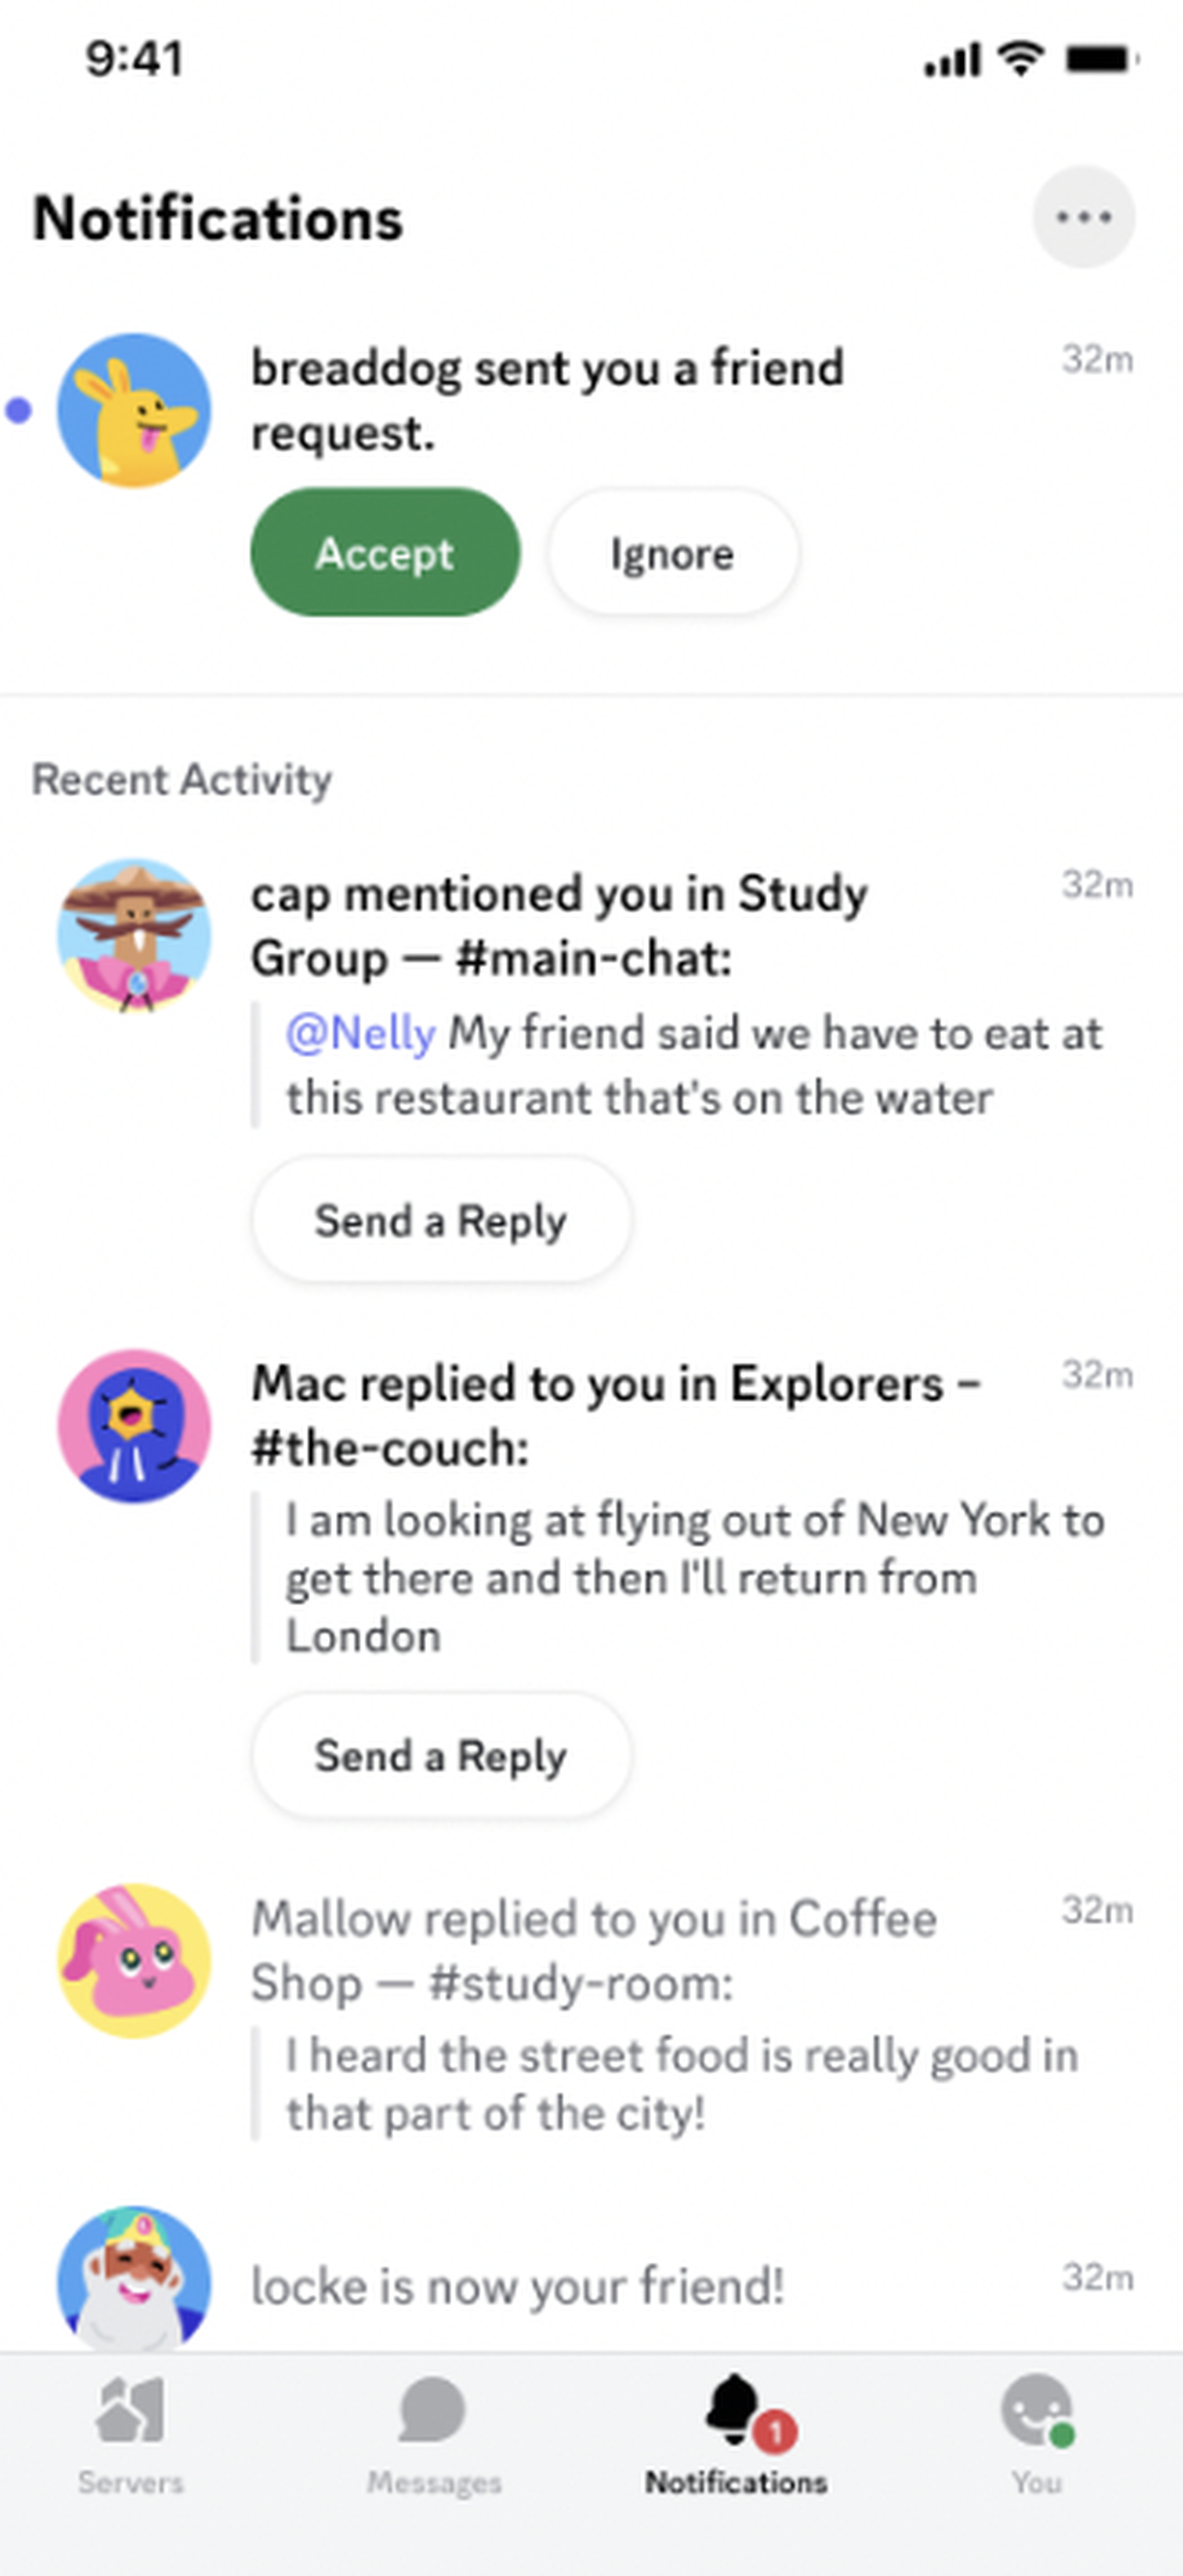 The Notifications tab in the updated Discord mobile app.